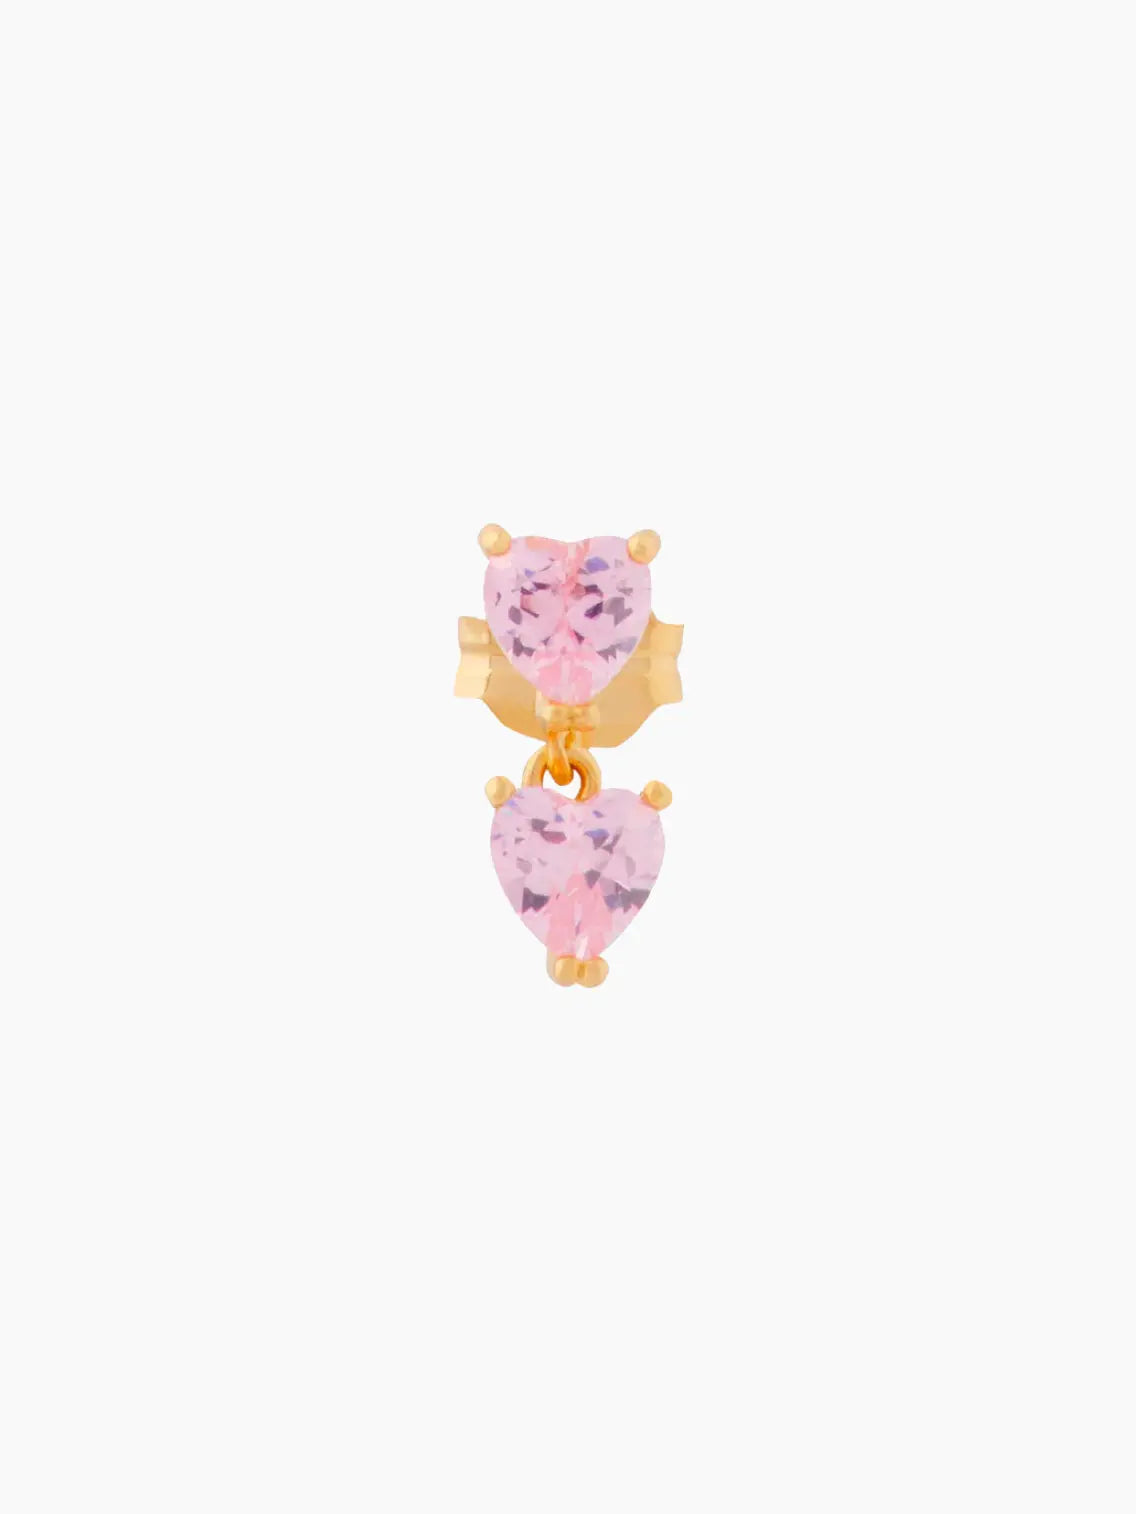 A Double Whisper Heart Stud Pink from Wilhelmina Garcia in Barcelona, featuring two pink heart-shaped gemstones. One gemstone is fixed at the top while another dangles below it, both set in gold clasps. The design is simple and elegant, with a focus on the pink gemstones.